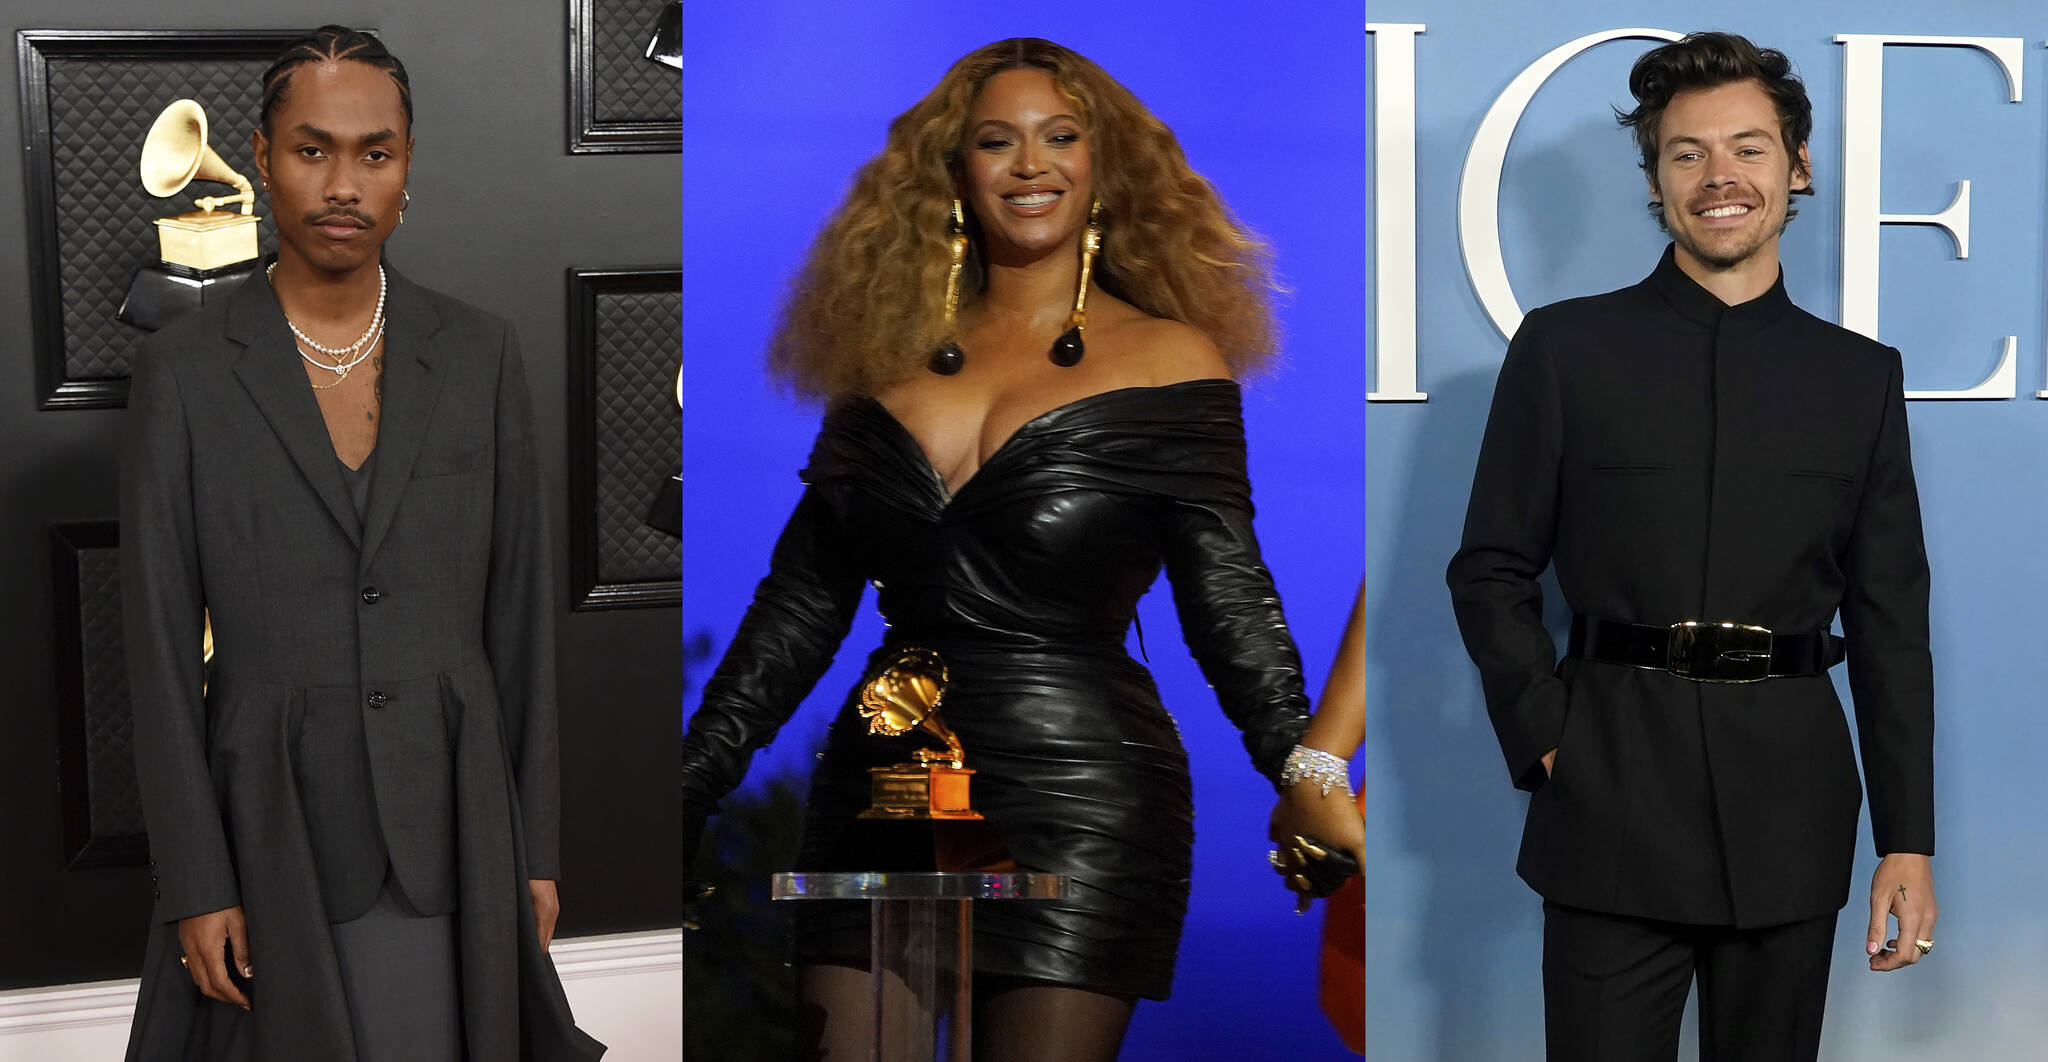 This combination of photos shows musicians, Steve Lacy, left, Beyonce, center, and Harry Styles. Lacy’s “Bad Habit” topped the Billboard Hot 100 chart and has continued to thrive. Beyoncé’s “Cuff It” track captures the spirit of fun, romance and infatuation. Style’s chart-topper “As It Was” is a bittersweet and brightly packaged bop. (AP Photo)